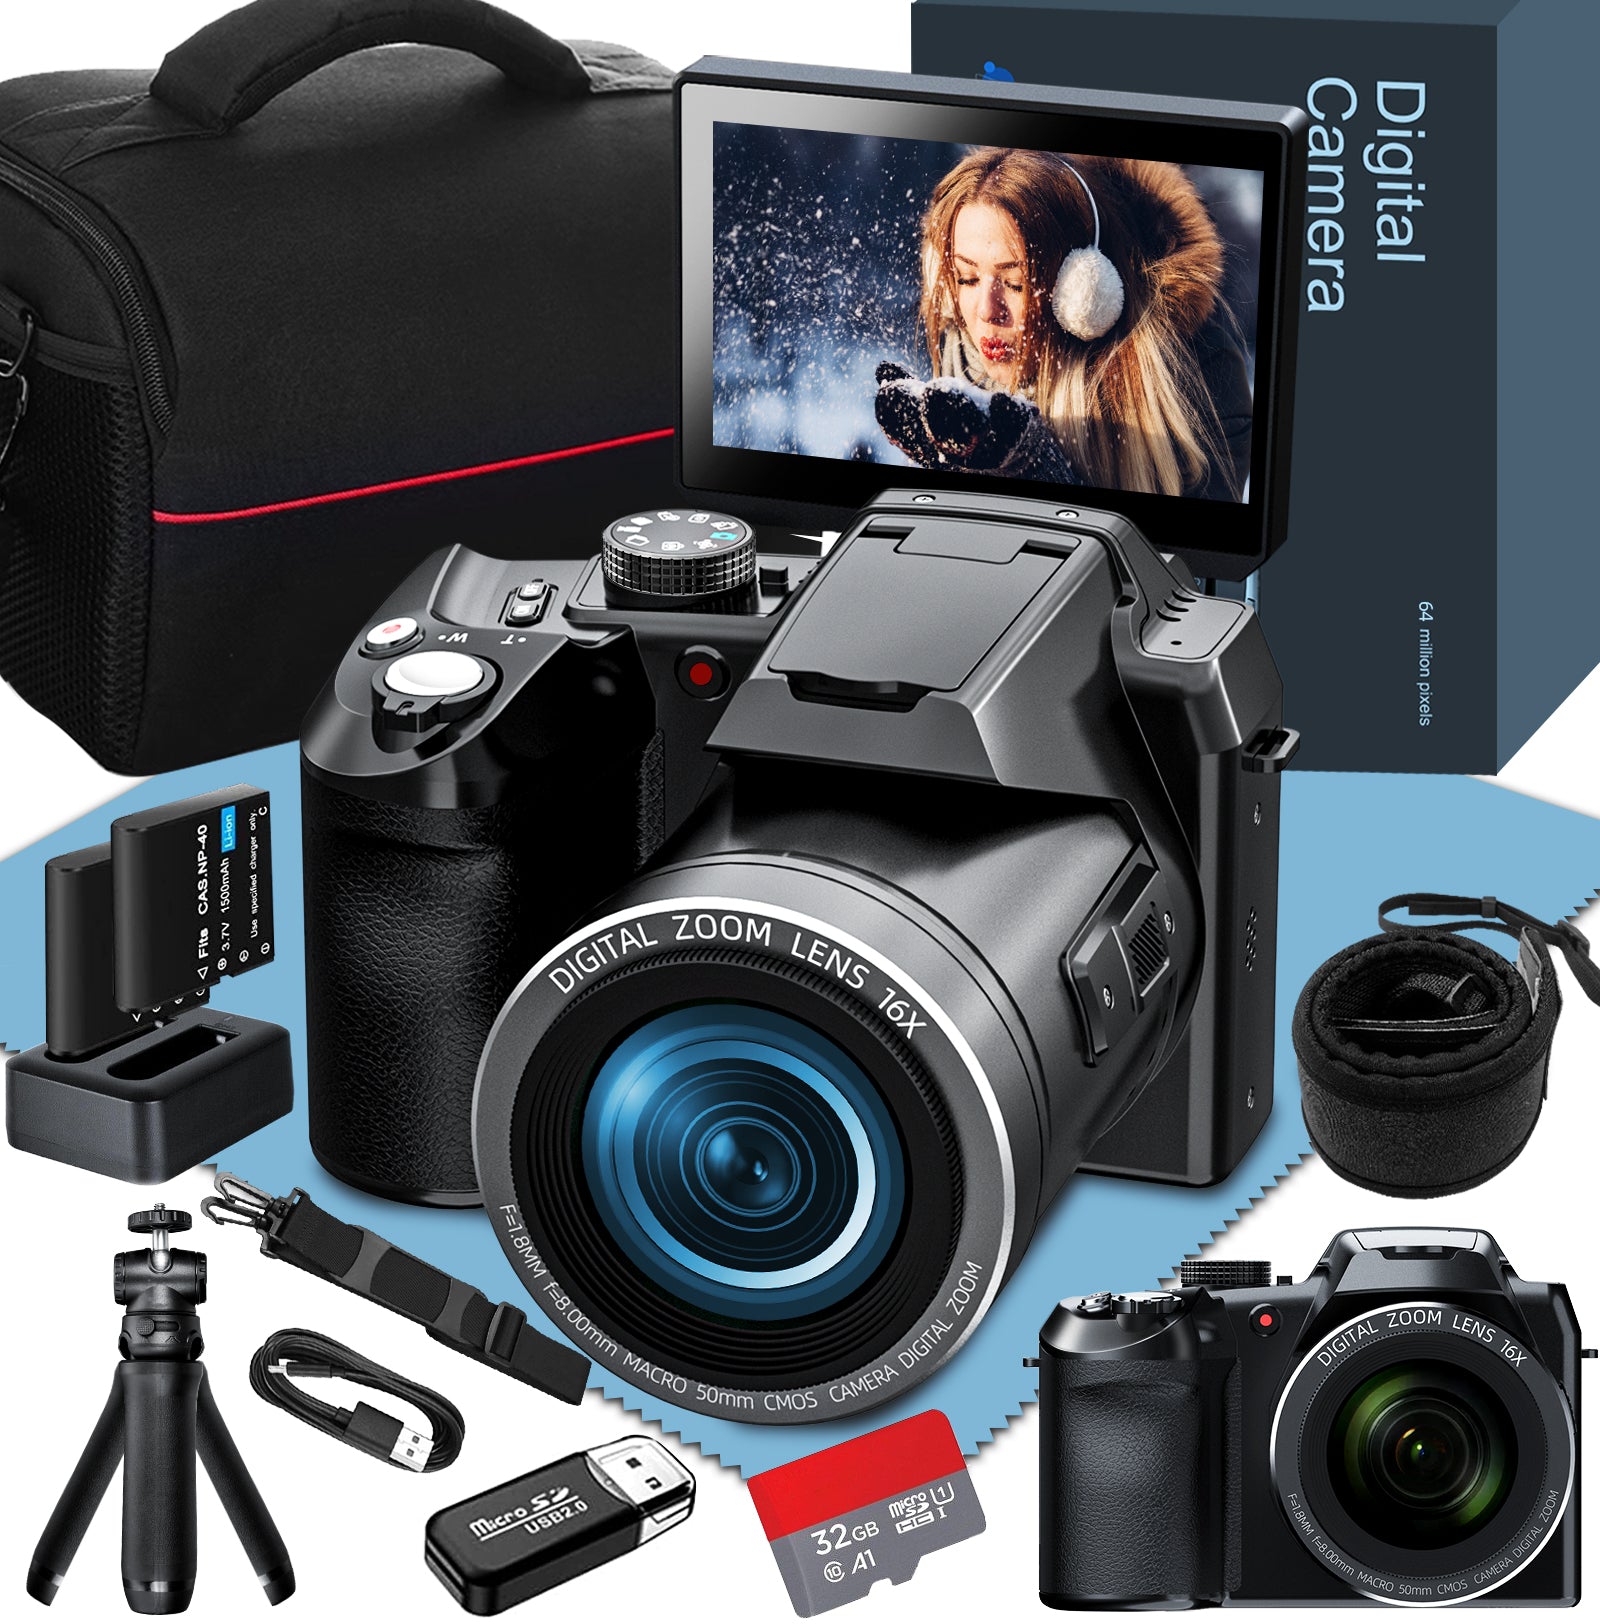 NBD Digital Camera for photography,4K 64MP Video Camera Youtube Vlogging Camera with 16X Digital Zoom and 32GB SD Card